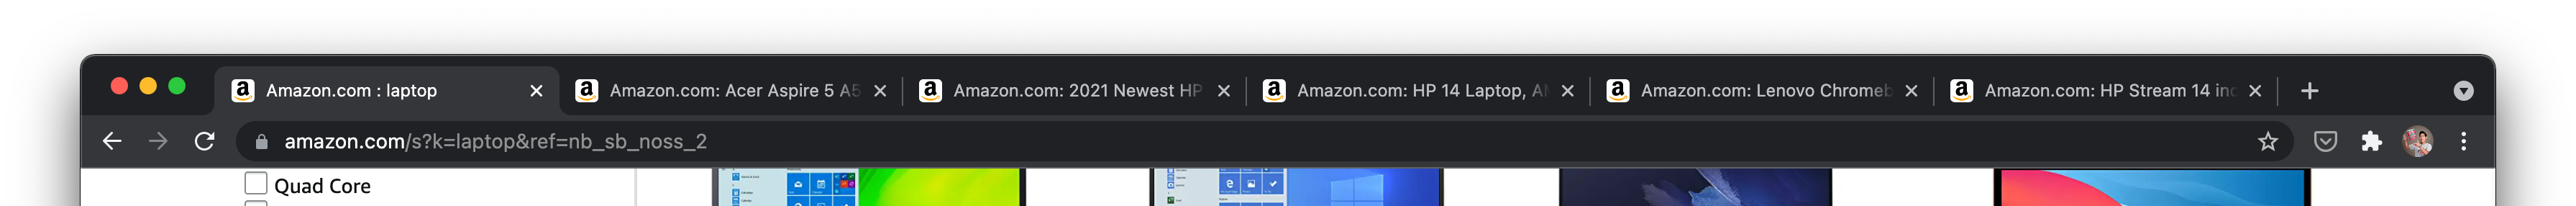 Multiple open tabs while in comparison shopping mode